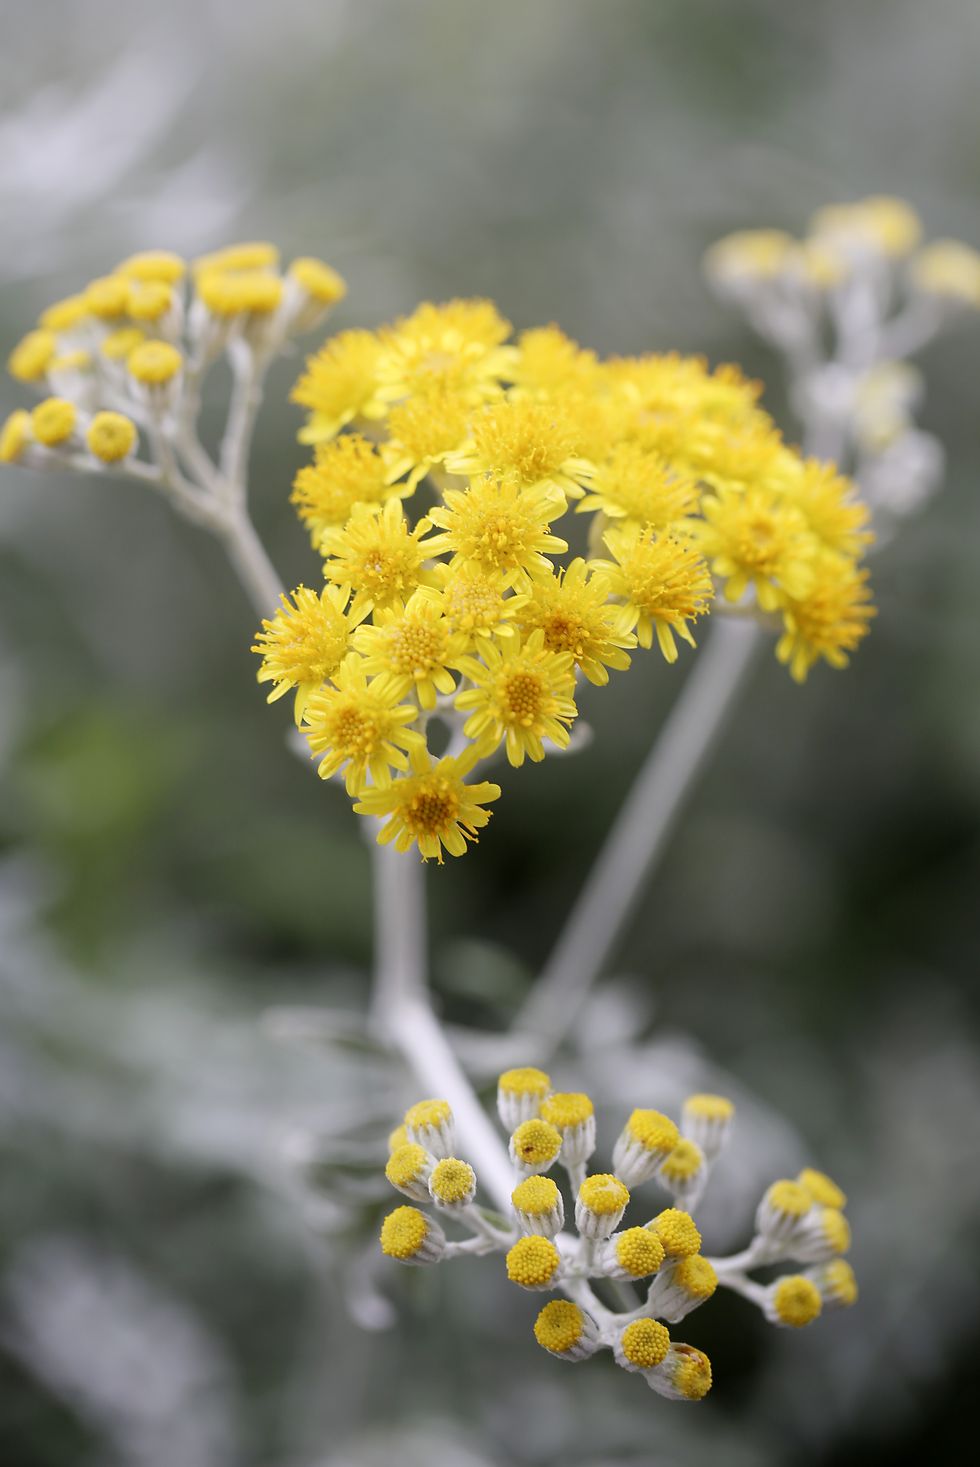 yellow dusty miller flowers with silver stems